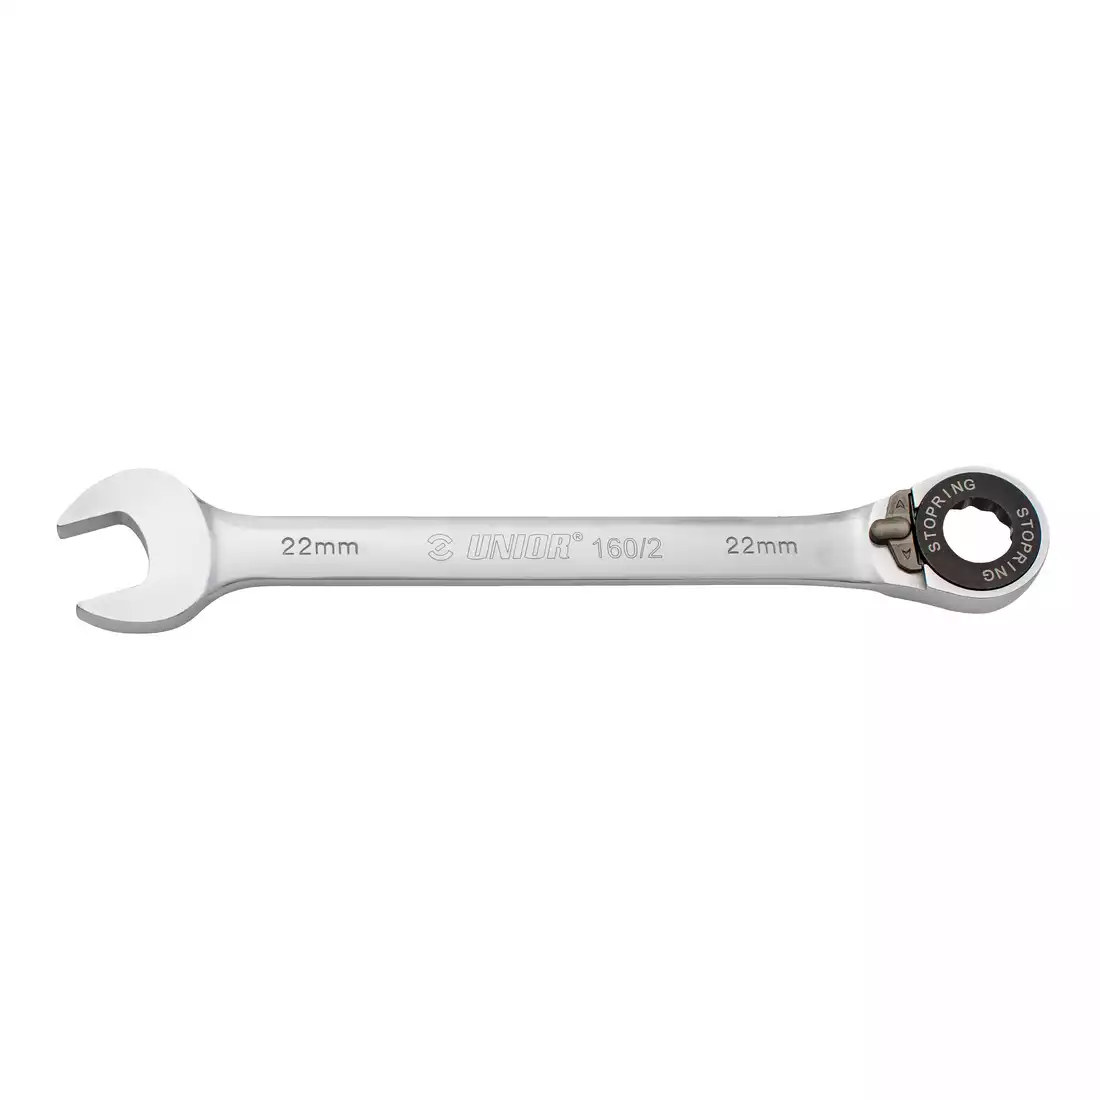 UNIOR combination wrench with ratchet size 10